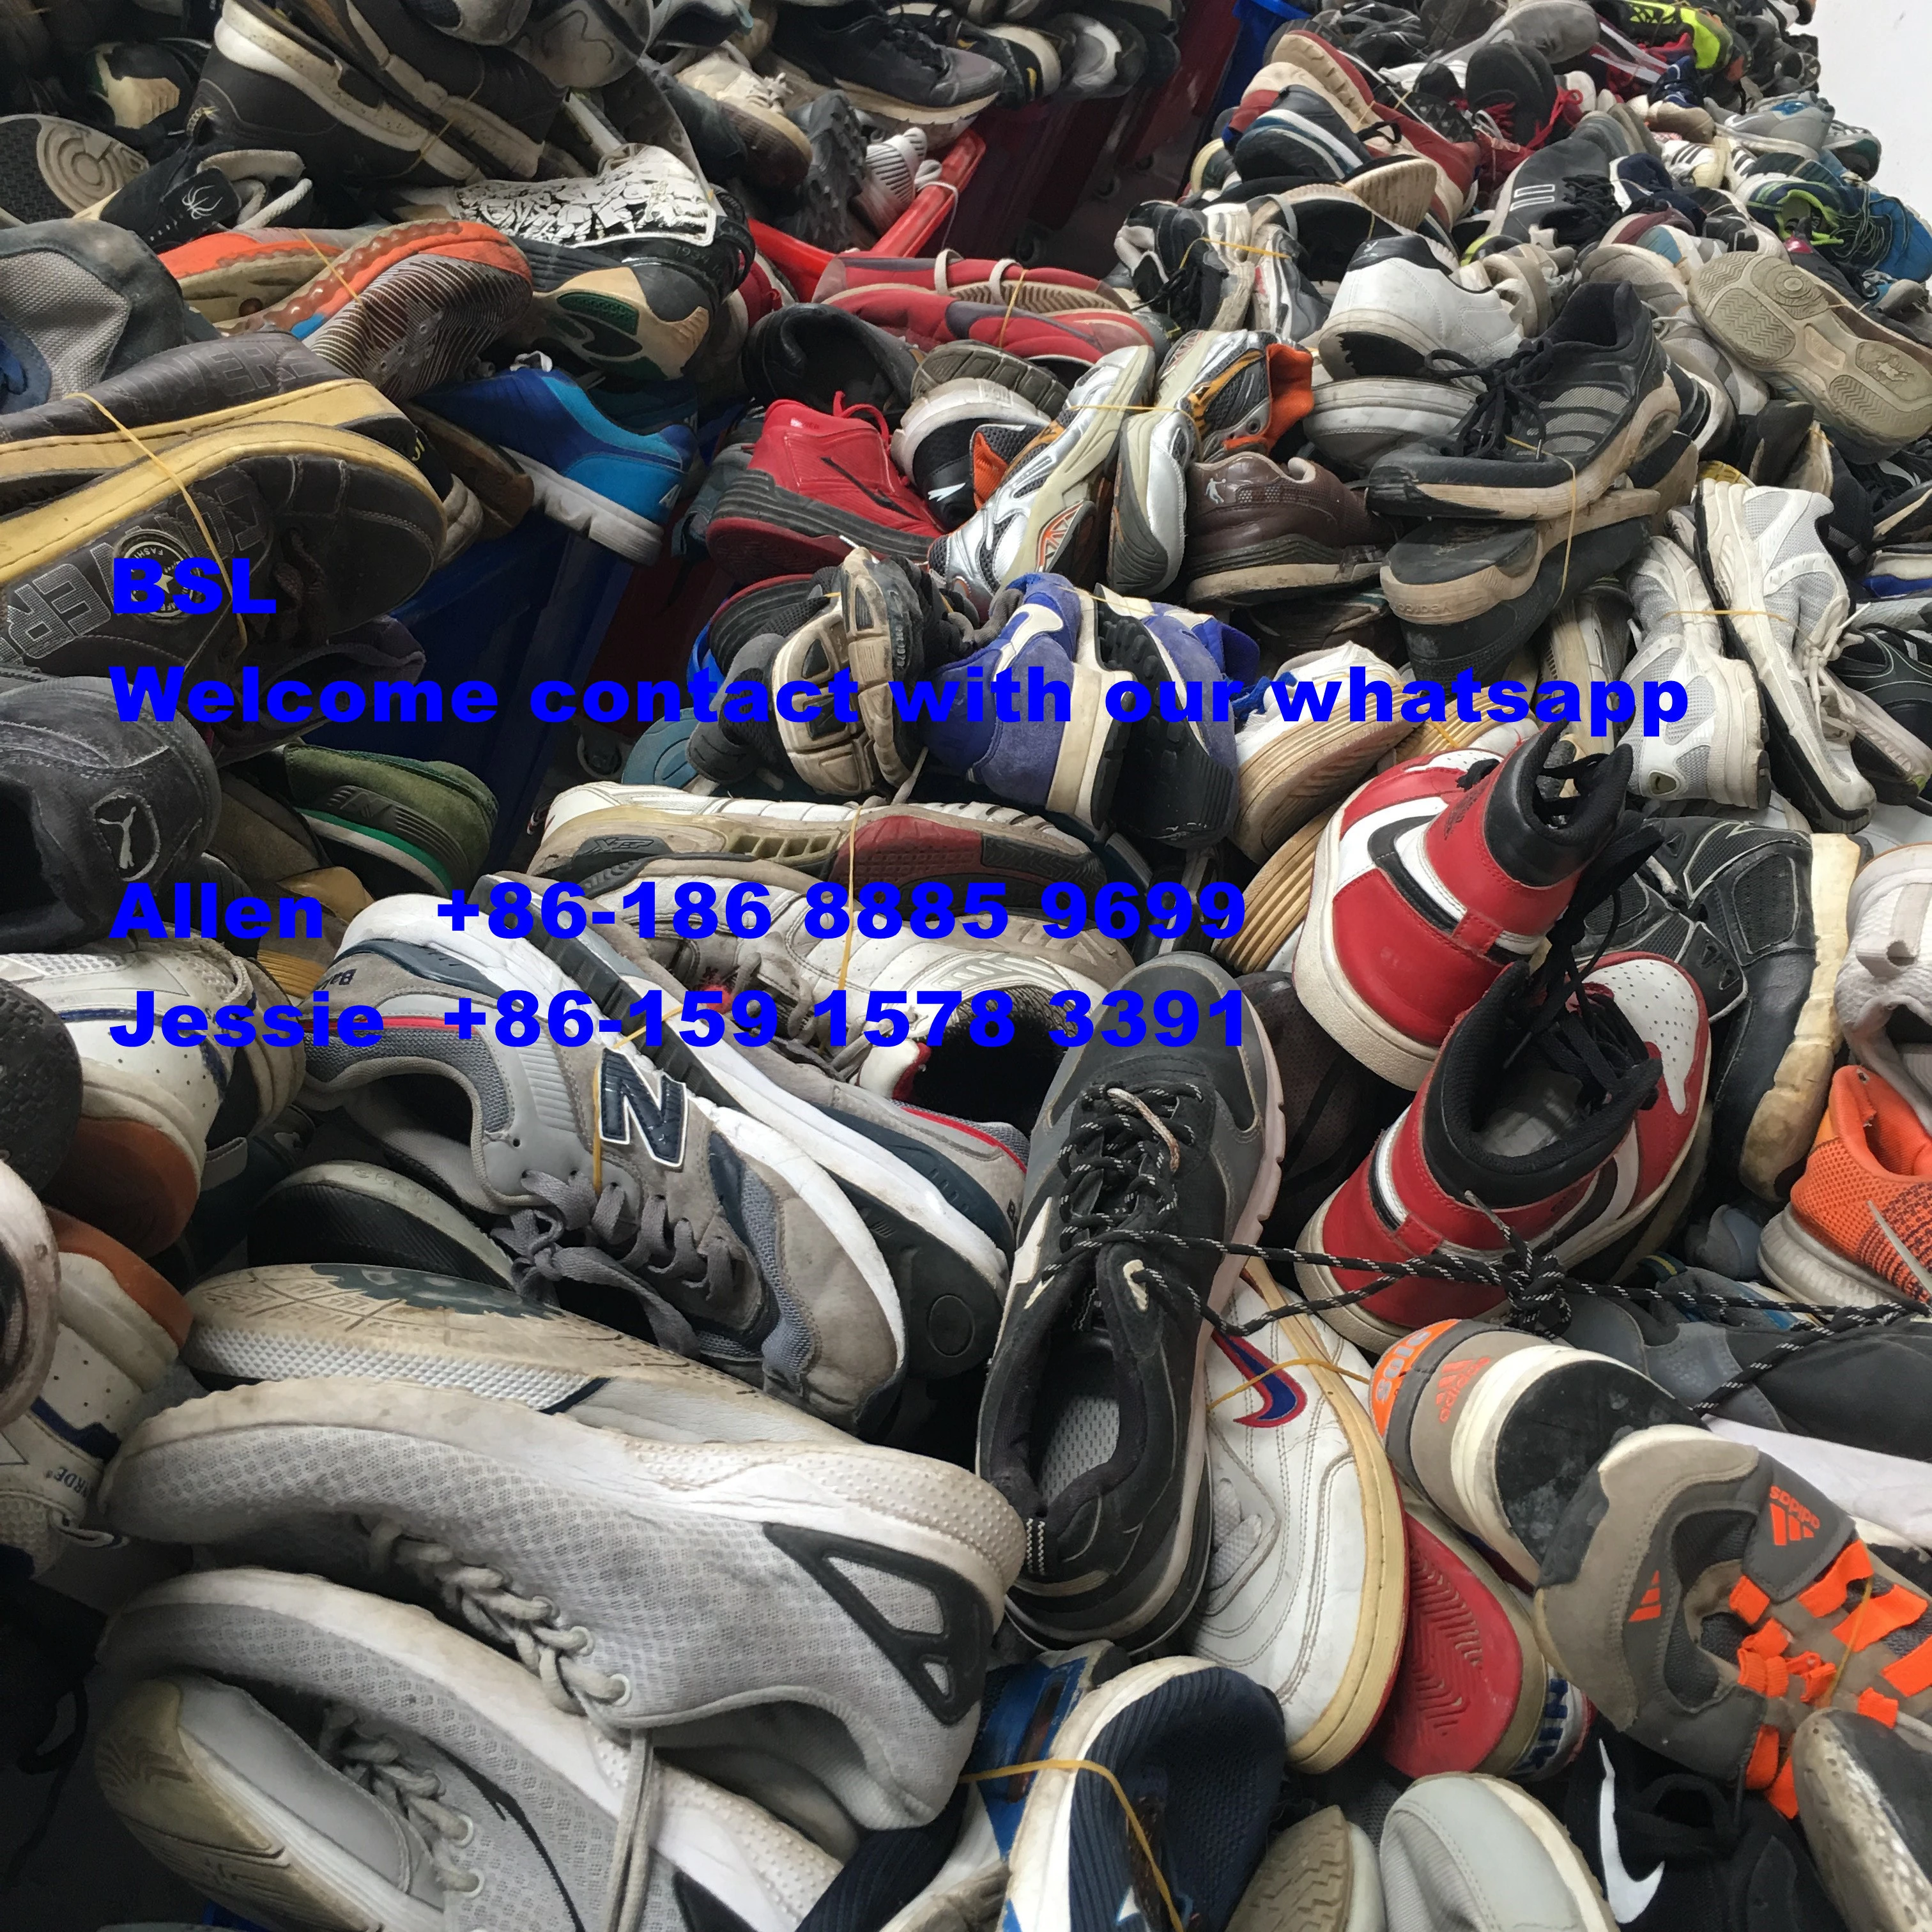 Famous second brand good shoes wholesale used shoes for sale in bale big size shoes for men with competitive price